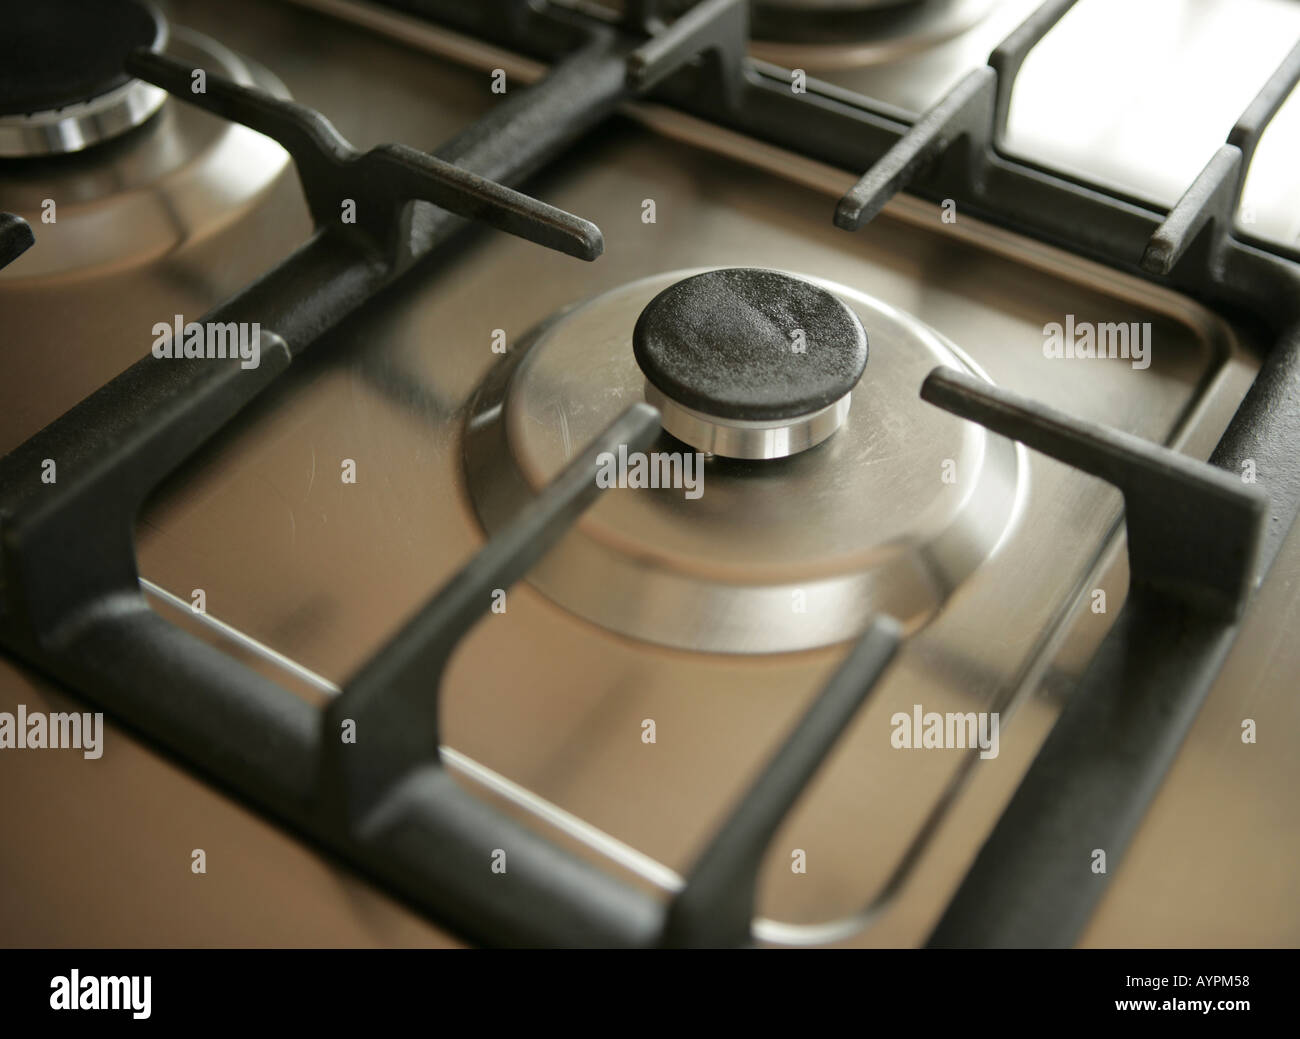 A close up of a gas stove Stock Photo